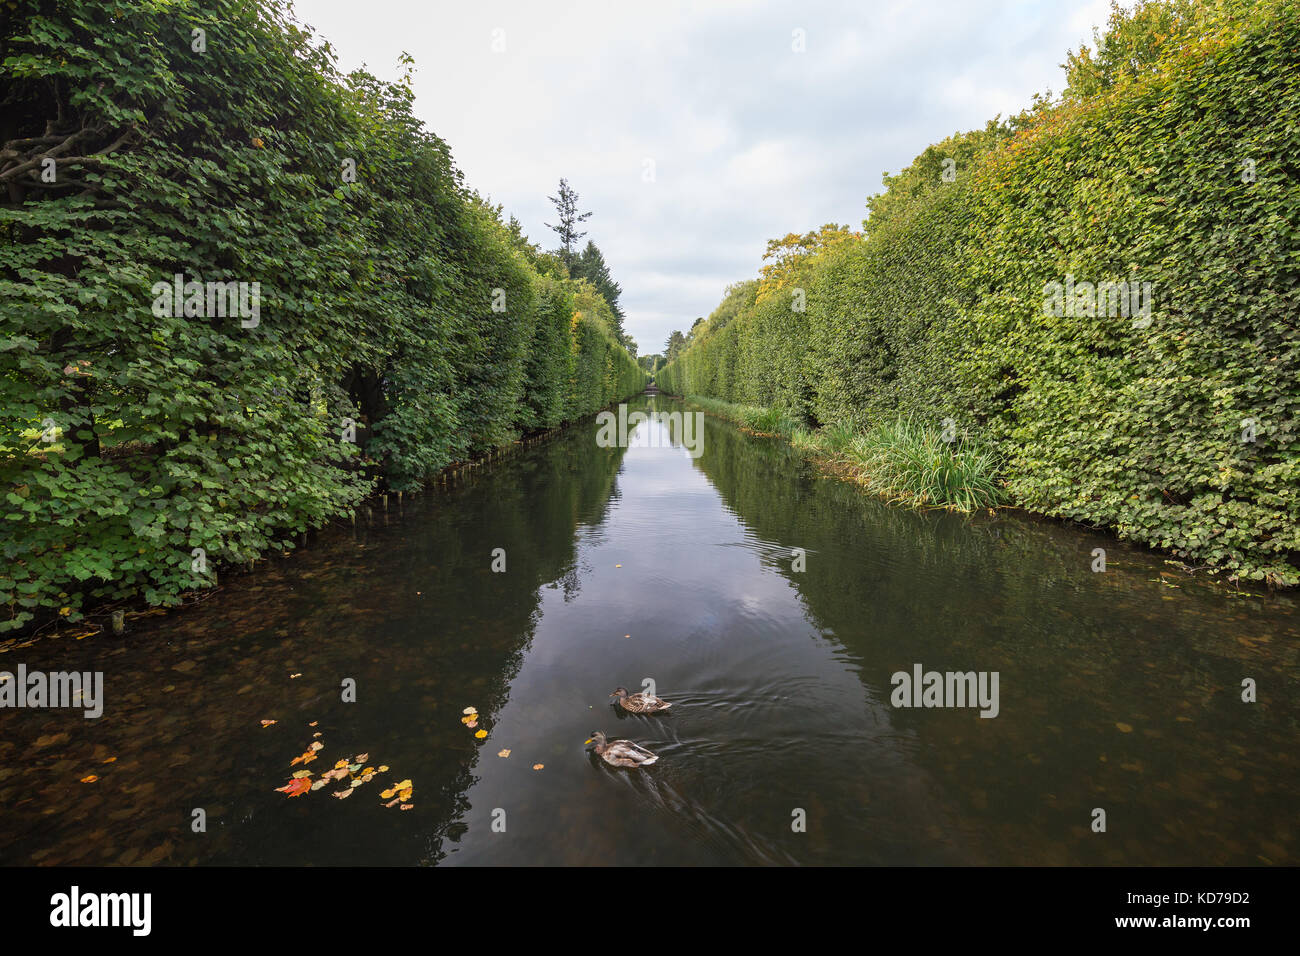 View of a water canal and lush hedge at the Oliwa Park (Park Oliwski). It's a public park in Gdansk, Poland. Stock Photo